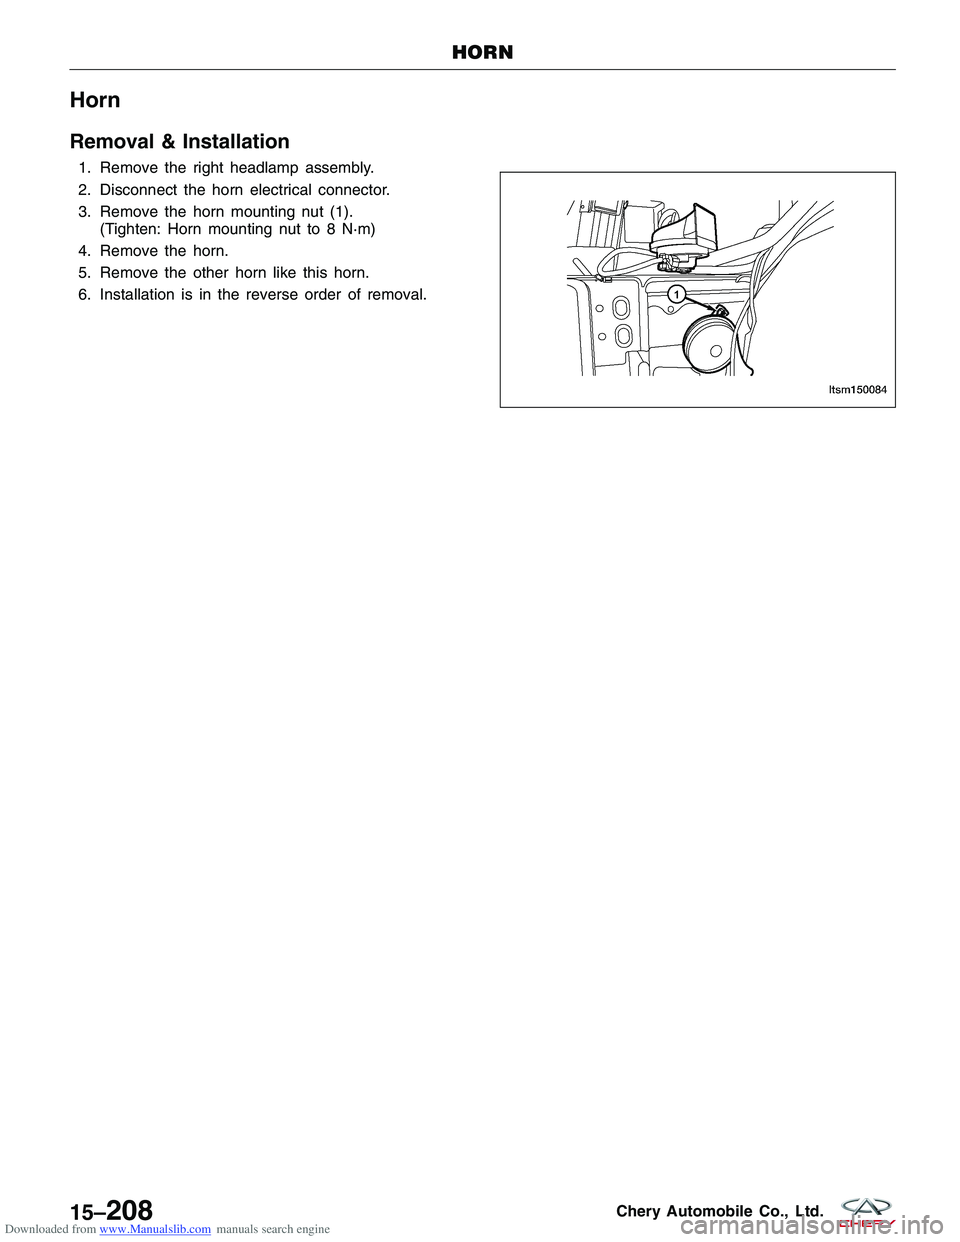 CHERY TIGGO 2009  Service Repair Manual Downloaded from www.Manualslib.com manuals search engine Horn
Removal & Installation
1. Remove the right headlamp assembly.
2. Disconnect the horn electrical connector.
3. Remove the horn mounting nut